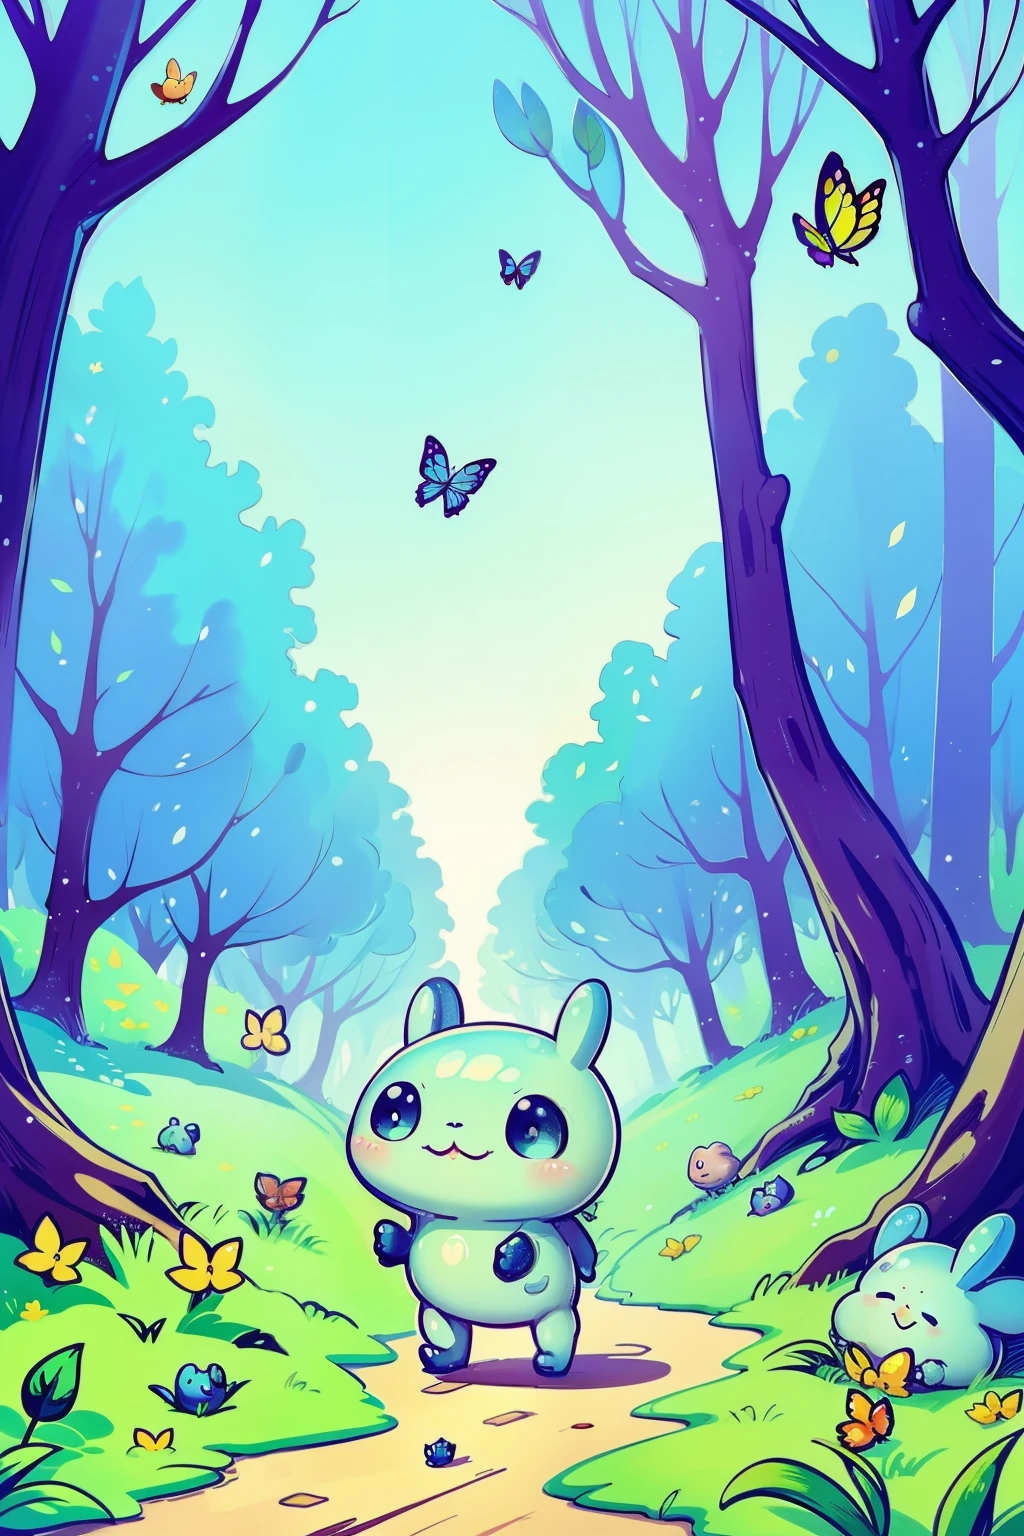 a cute little slime monster walks happily in a forest, trees with lots of leaves, flowers, blue sky, cute bunnies follow the little monster in the magic forest, butterflys,